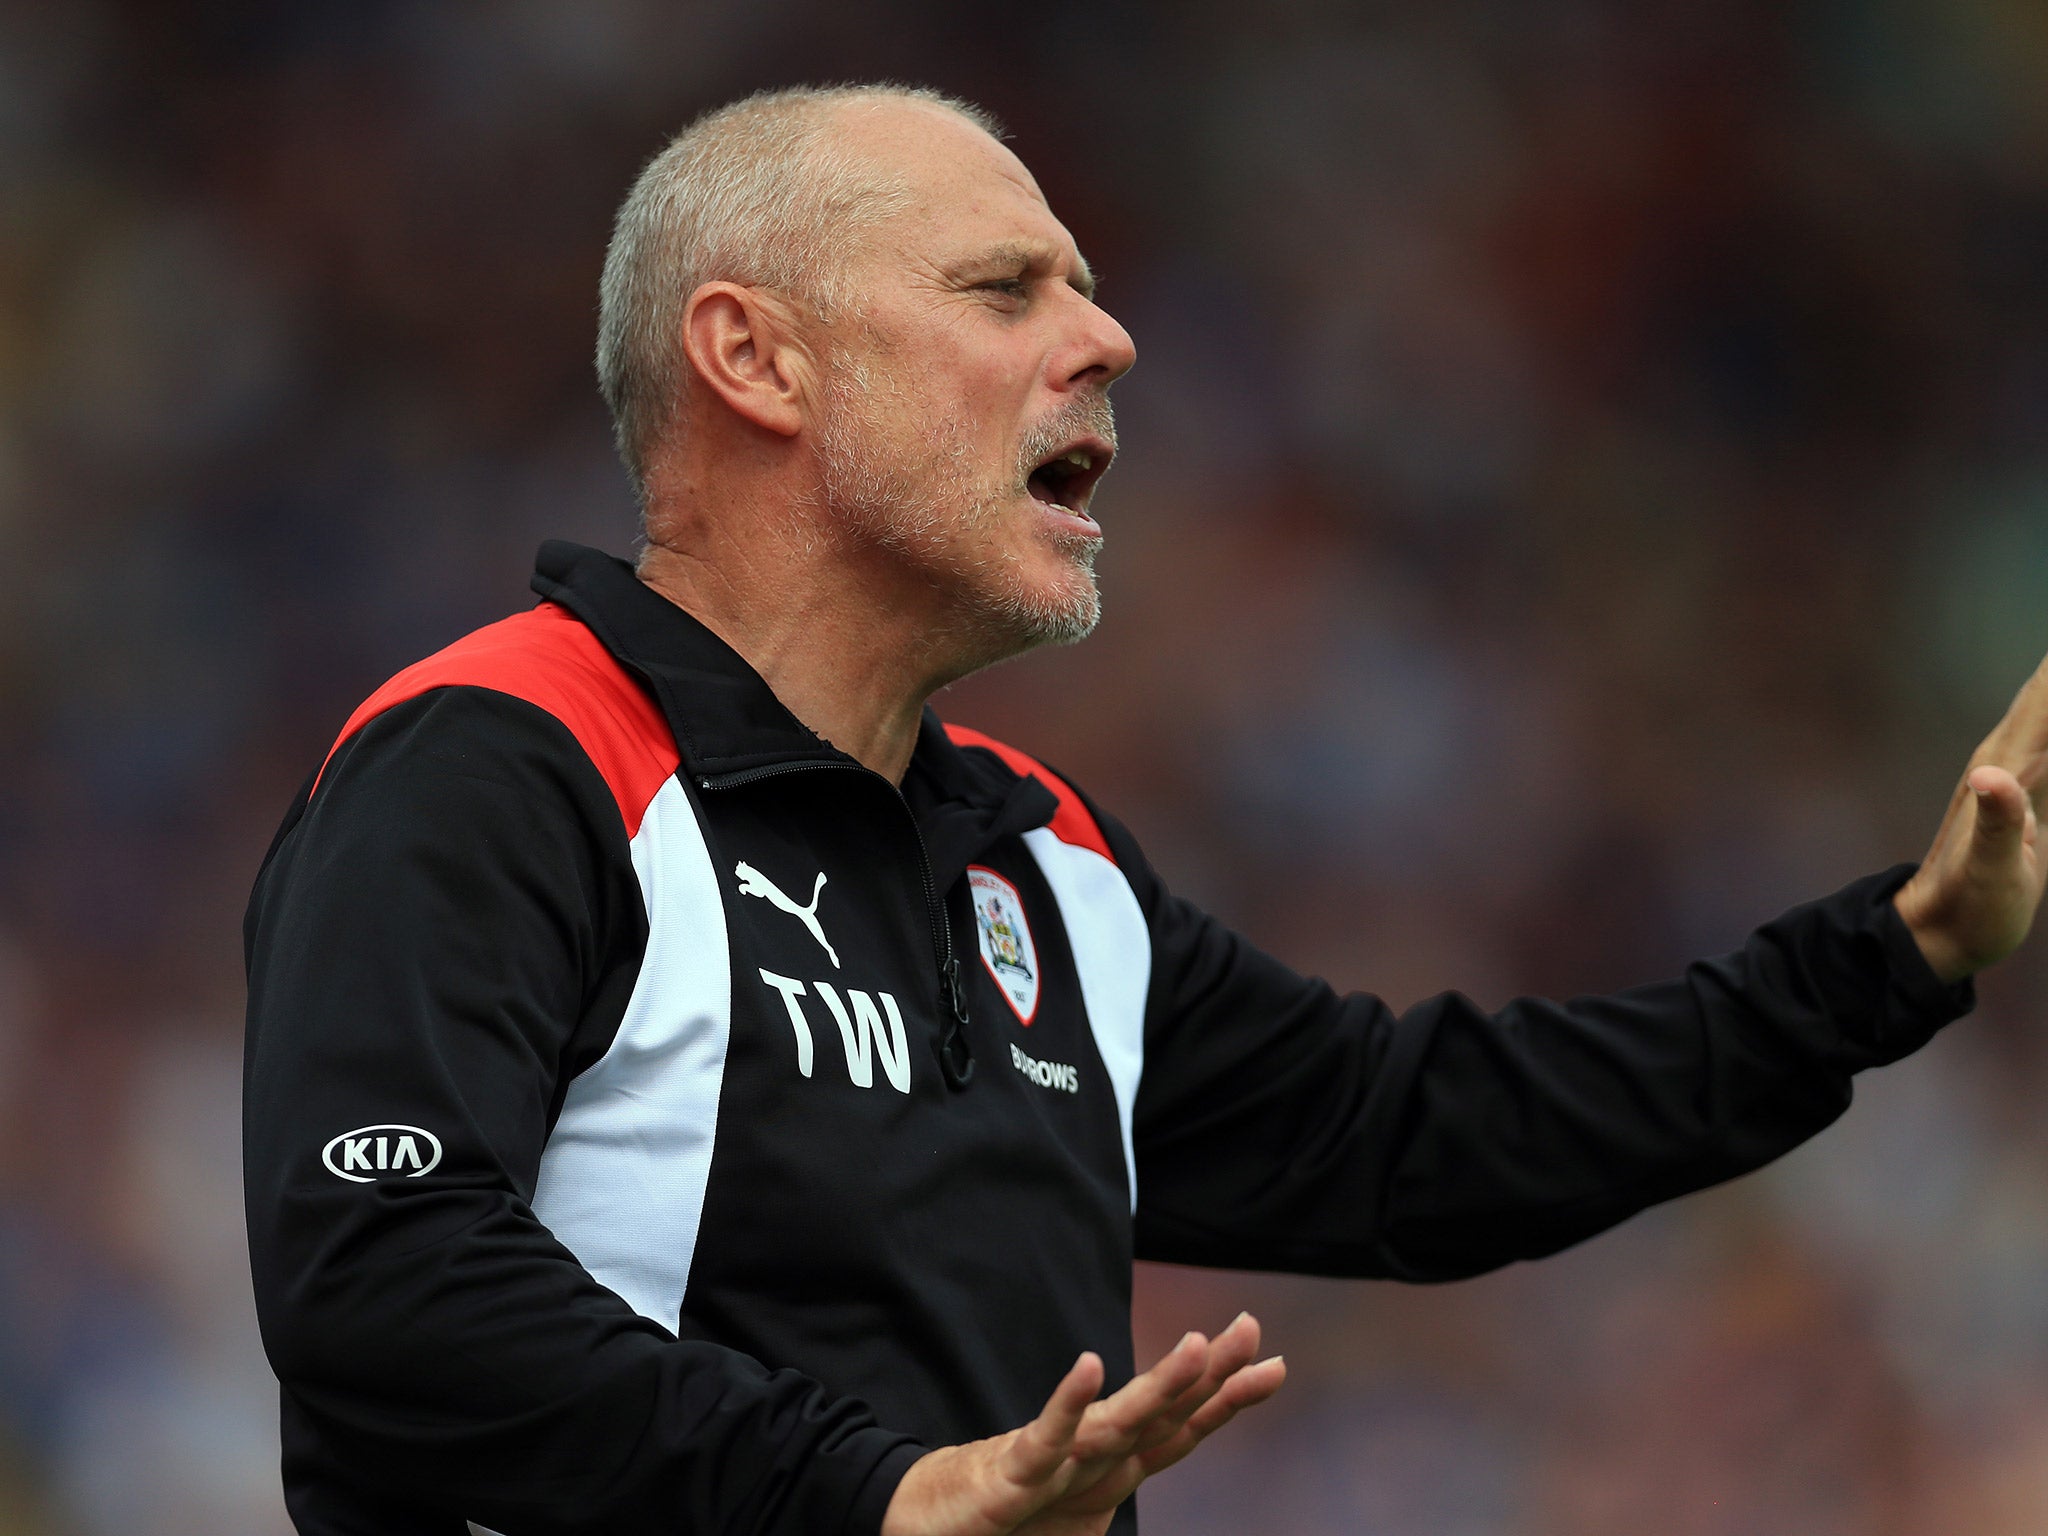 Tommy Wright has been sacked by Barnsley after an internal investigation